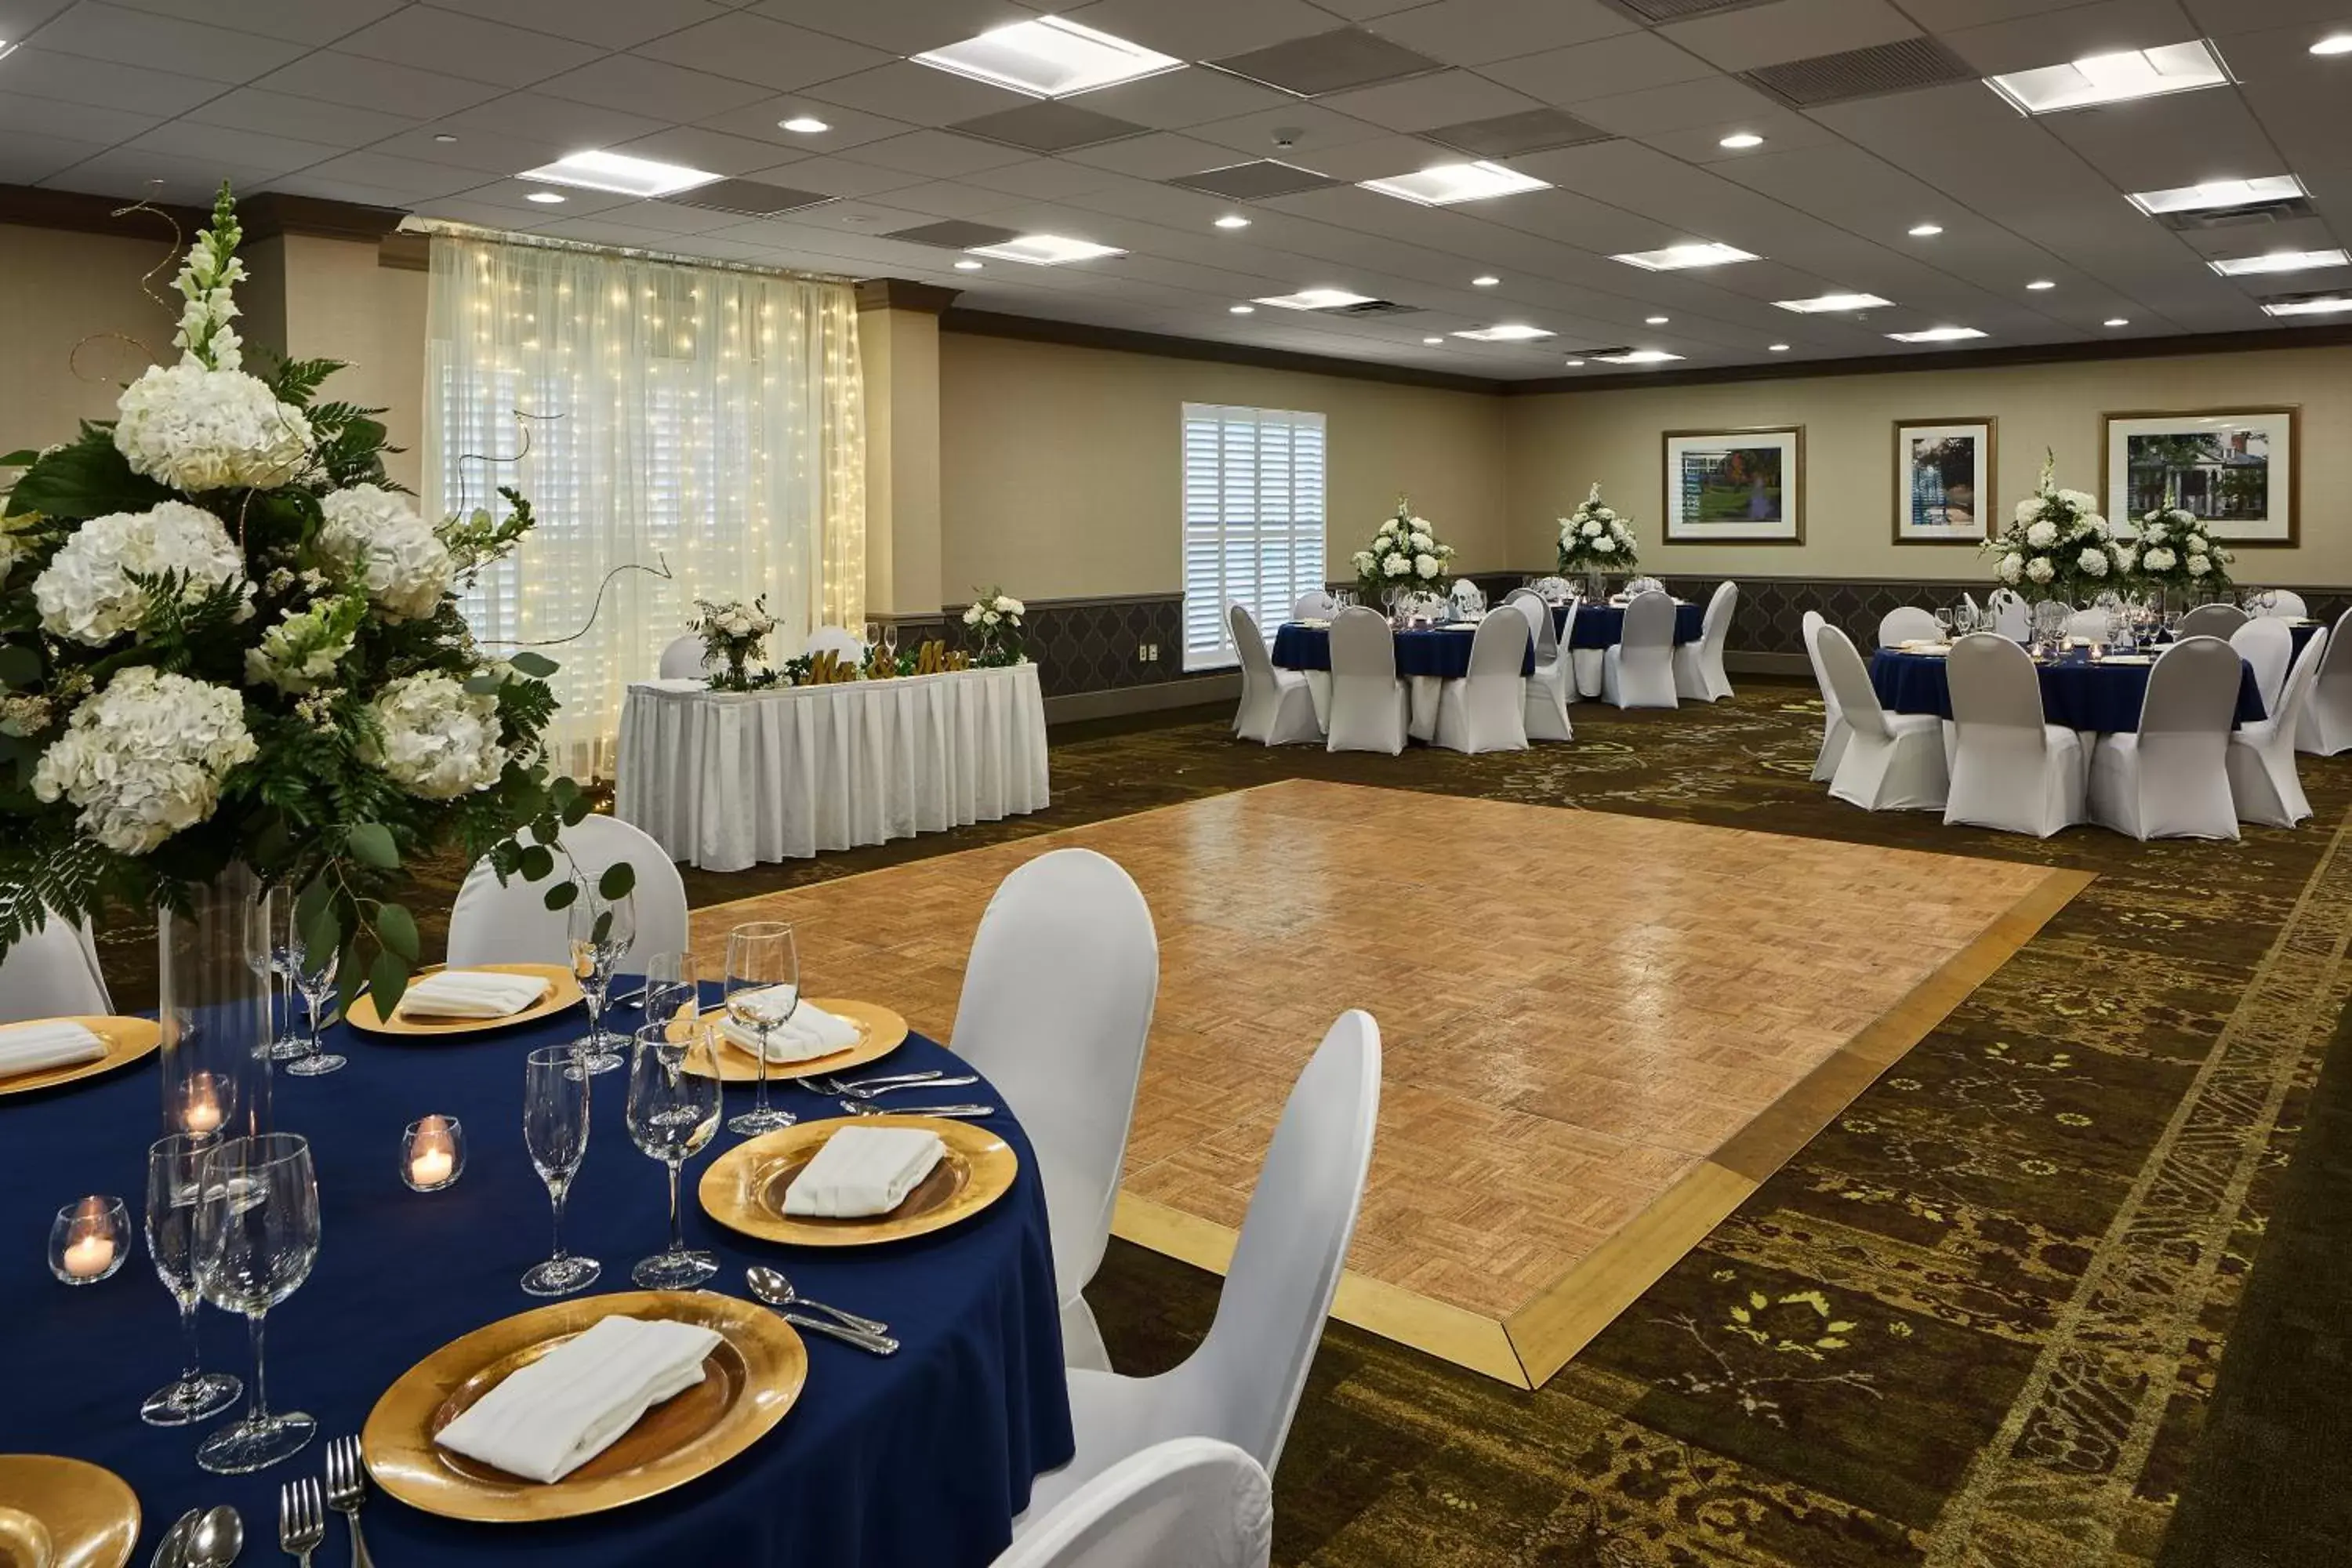 Meeting/conference room, Banquet Facilities in Ohio University Inn and Conference Center